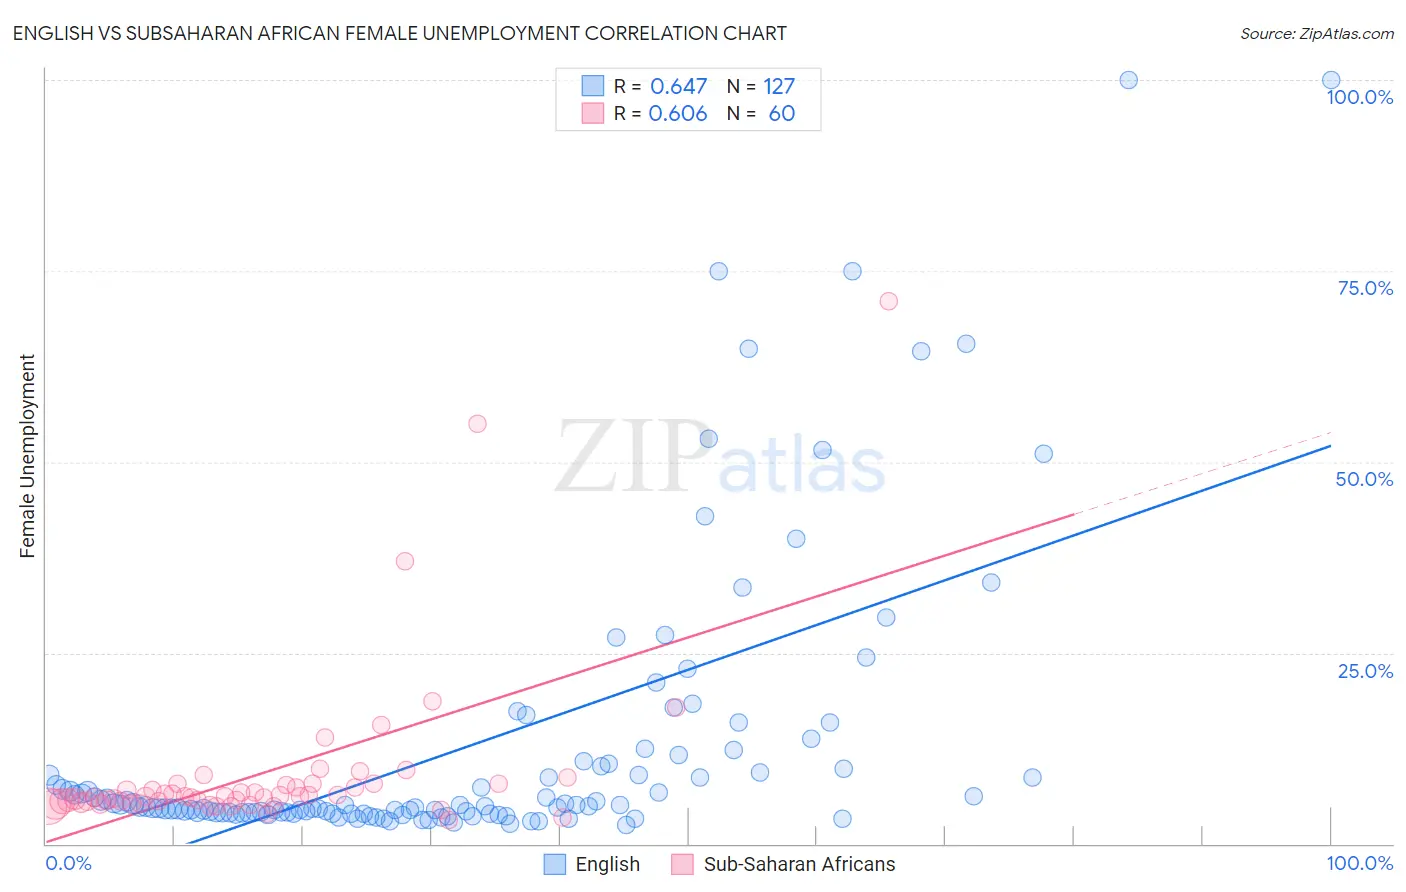 English vs Subsaharan African Female Unemployment